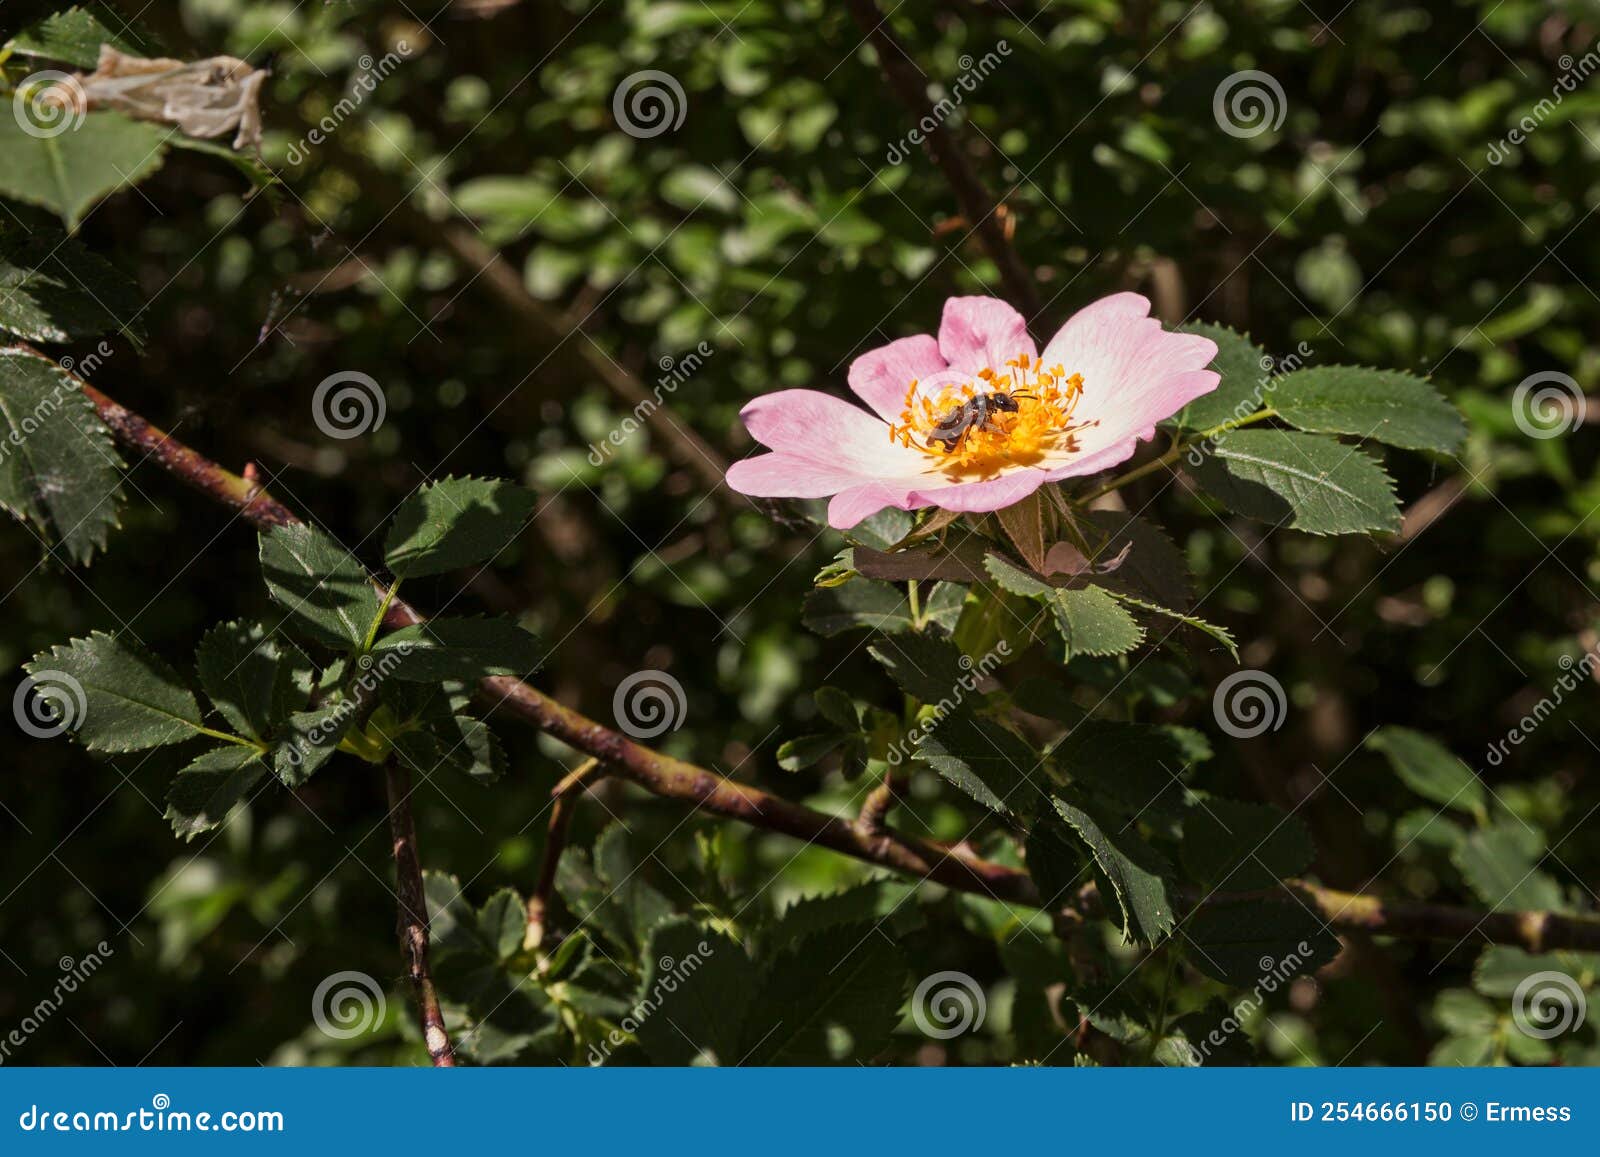 rosa canina dog rose with bee sucking nectar of flower - spontaneous officinal plant